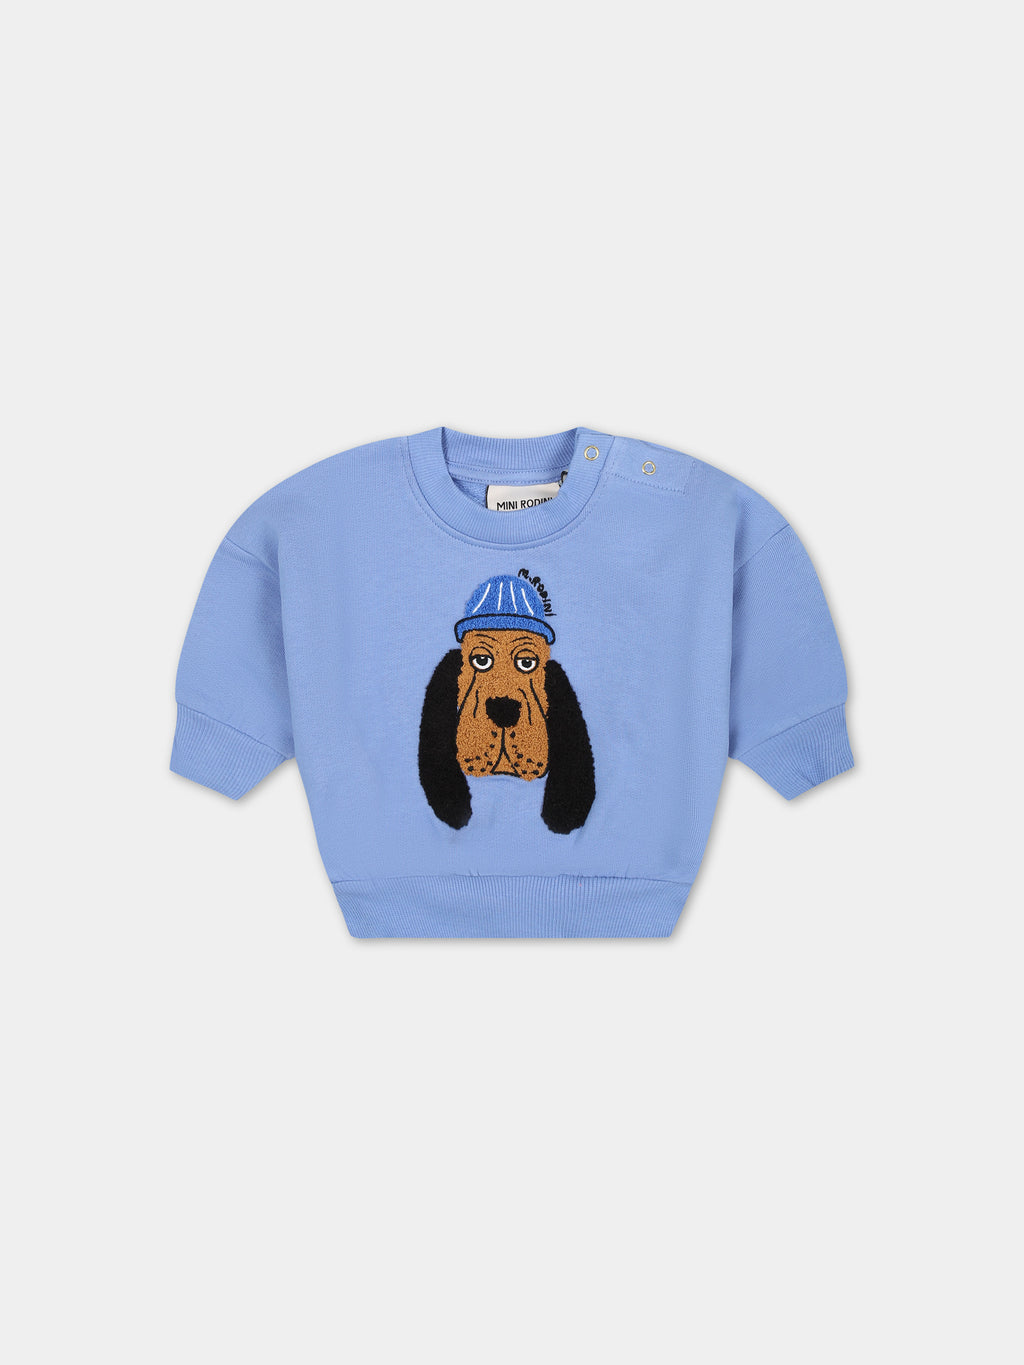 Light blue sweatshirt for baby kids with dog